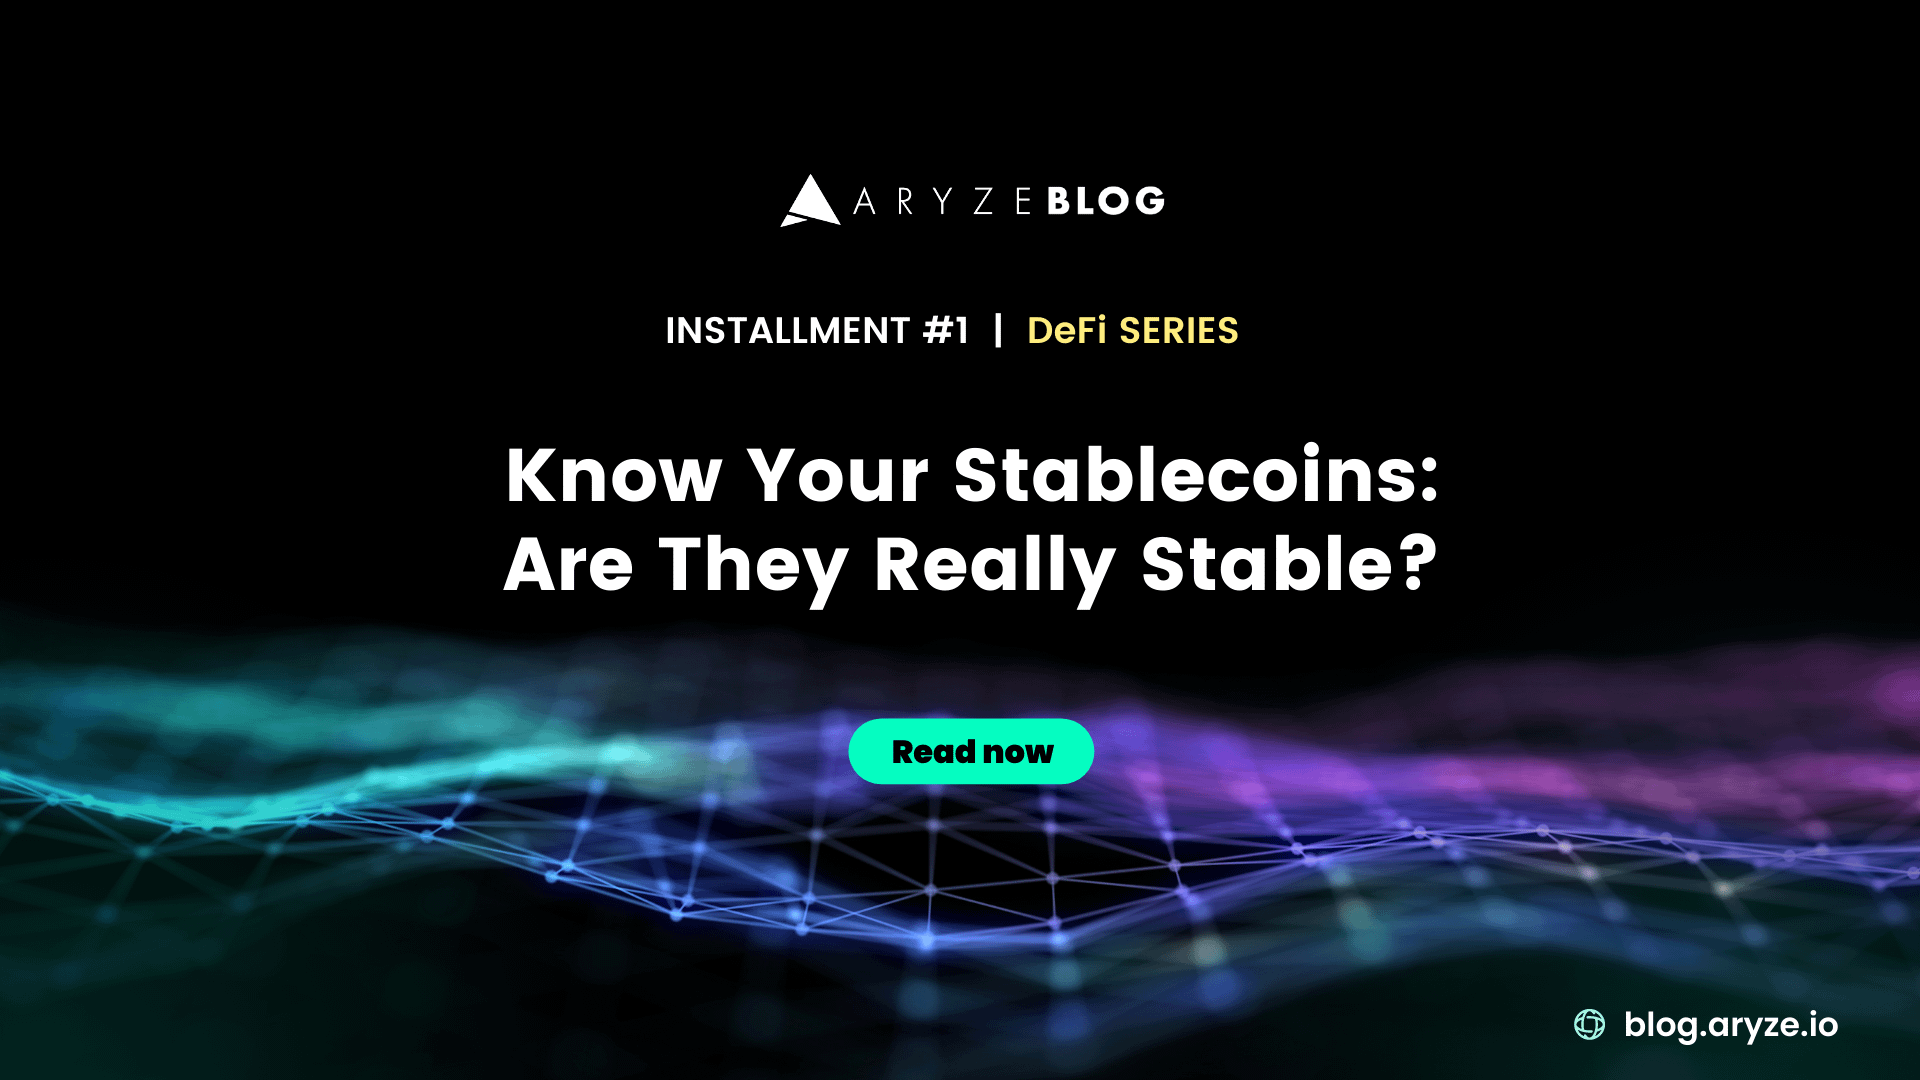 ARYZE Blog | Know Your Stablecoins (DeFi Series #1)